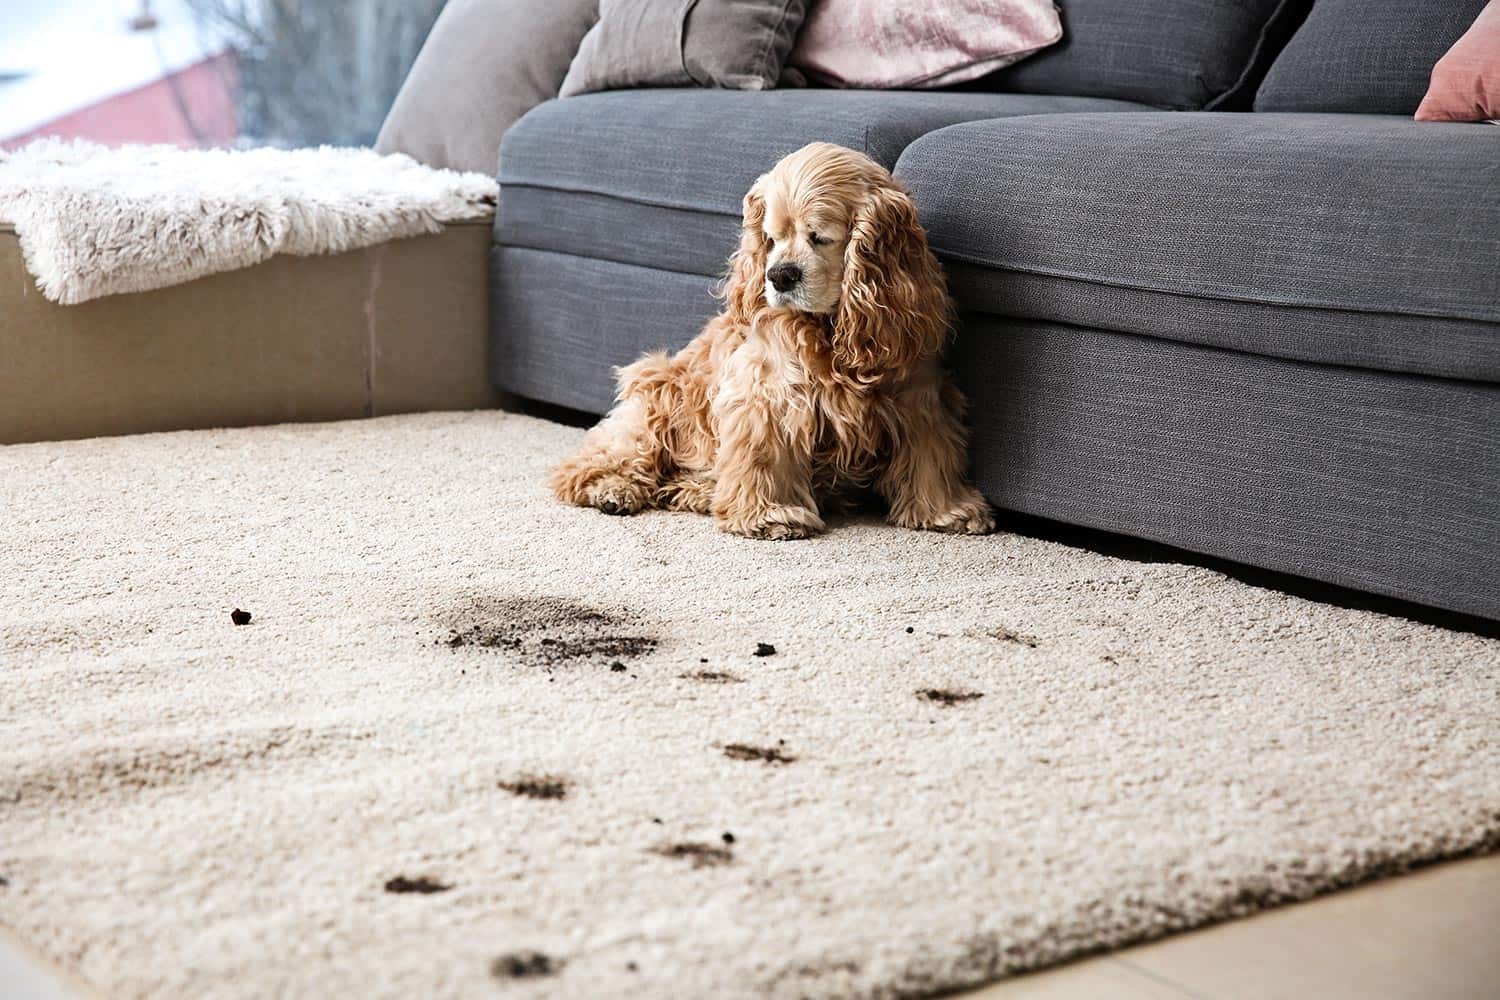 Dog and its dirty trails on carpet